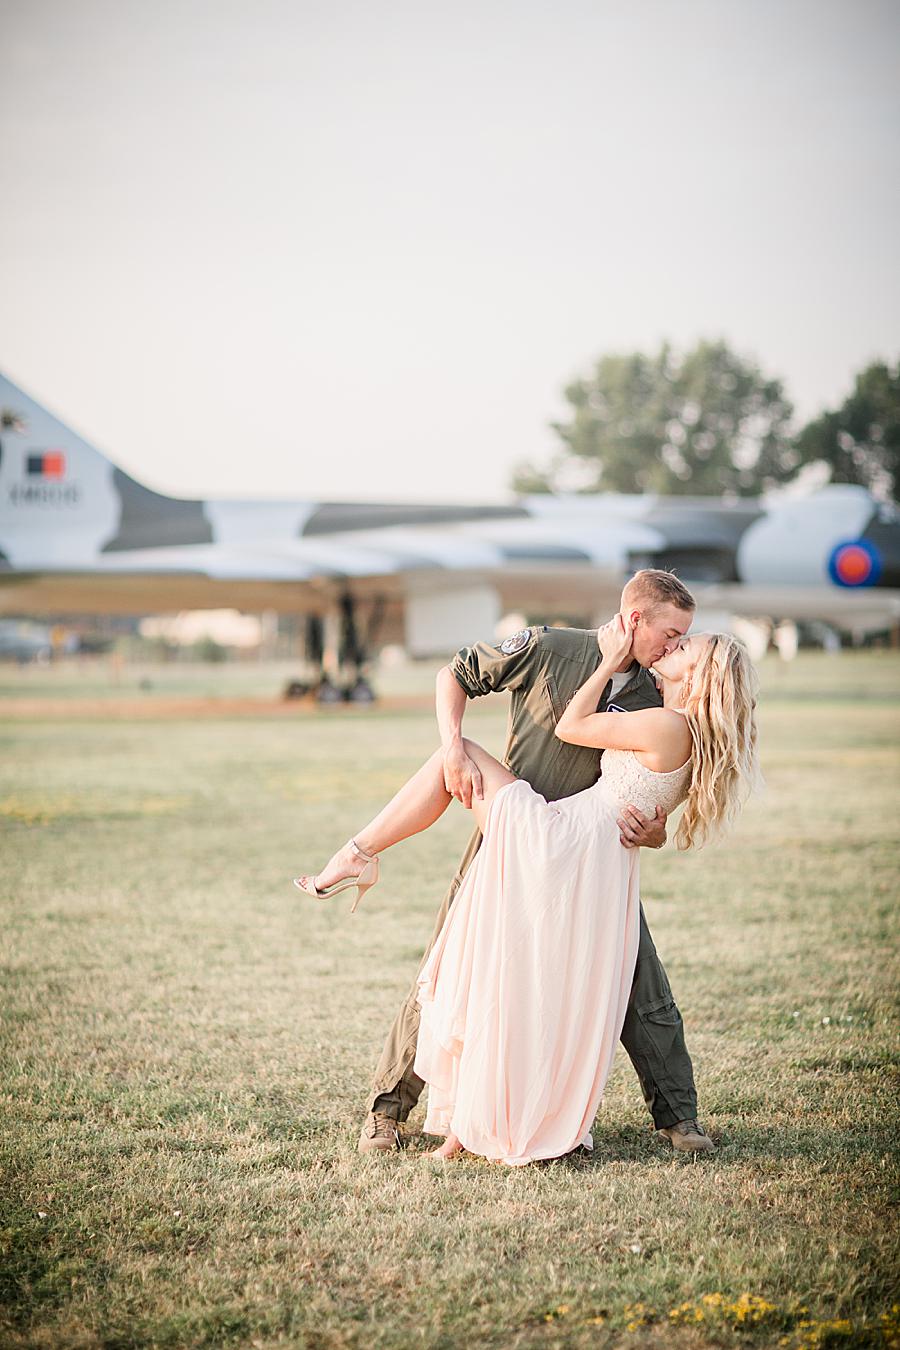 Dipping at this 2018 favorite engagements by Knoxville Wedding Photographer, Amanda May Photos.